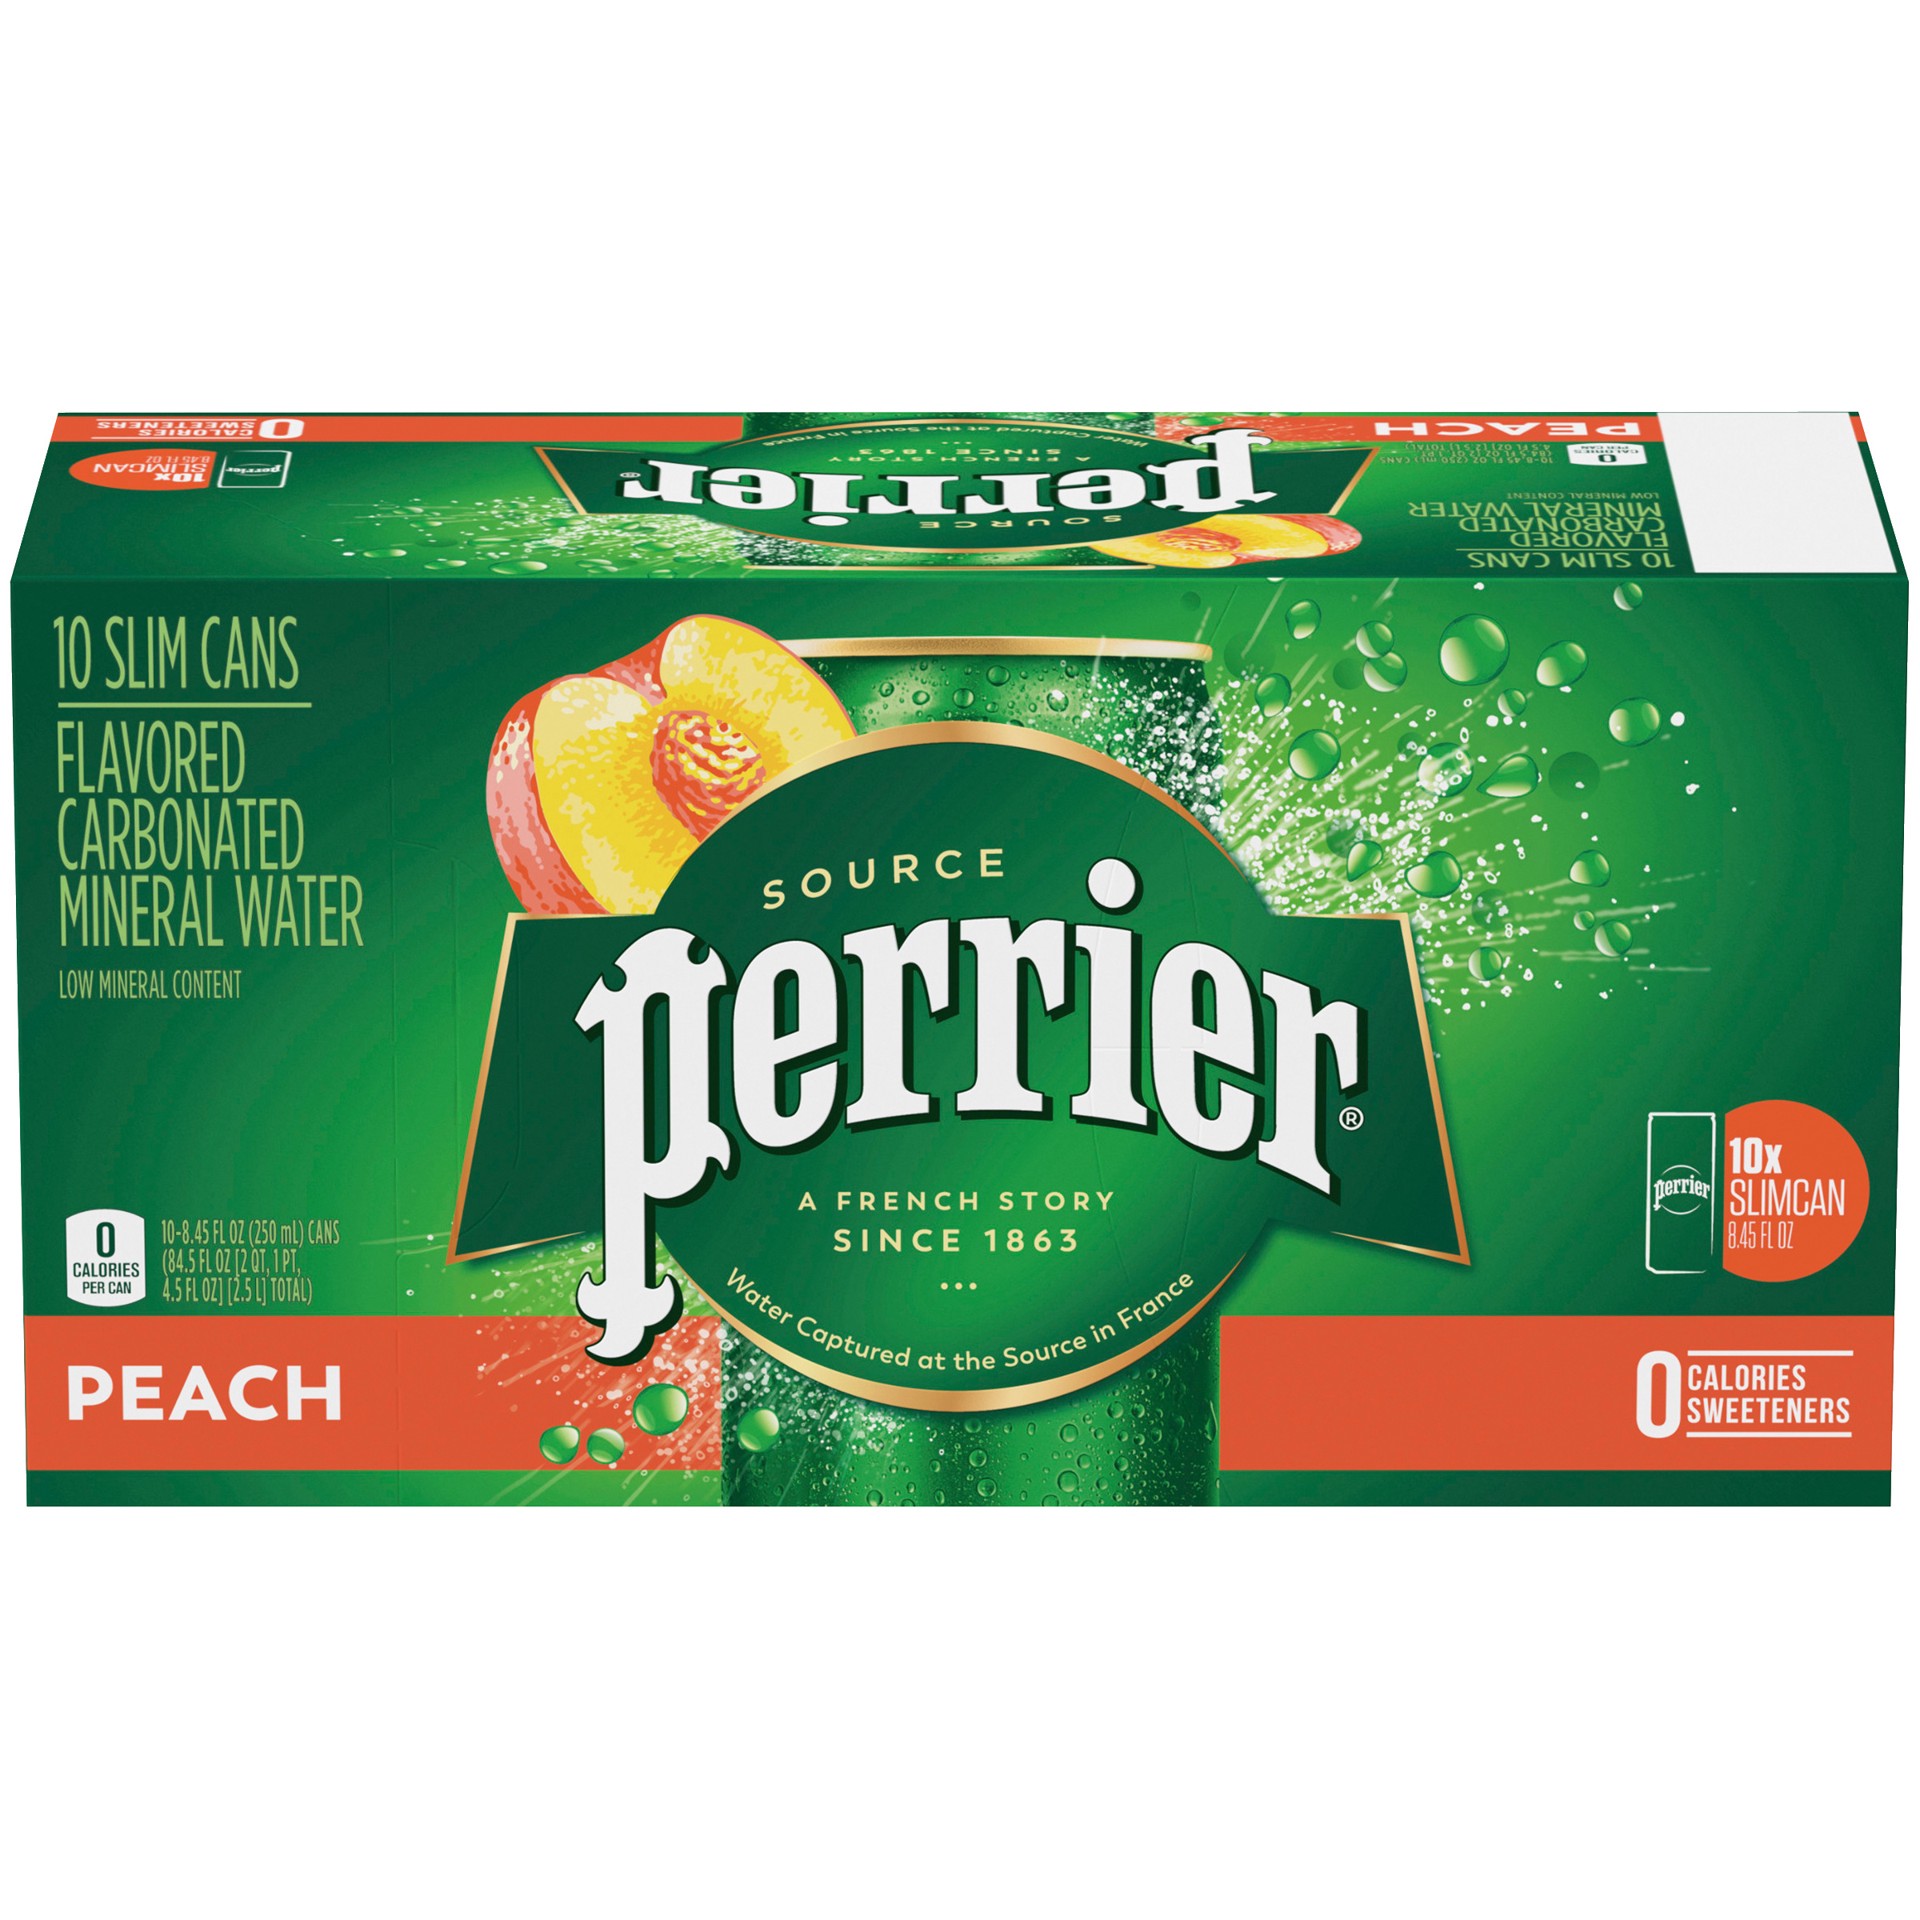 slide 1 of 2, PERRIER Peach Flavored Carbonated Mineral Water, 10 ct; 8.45 fl oz